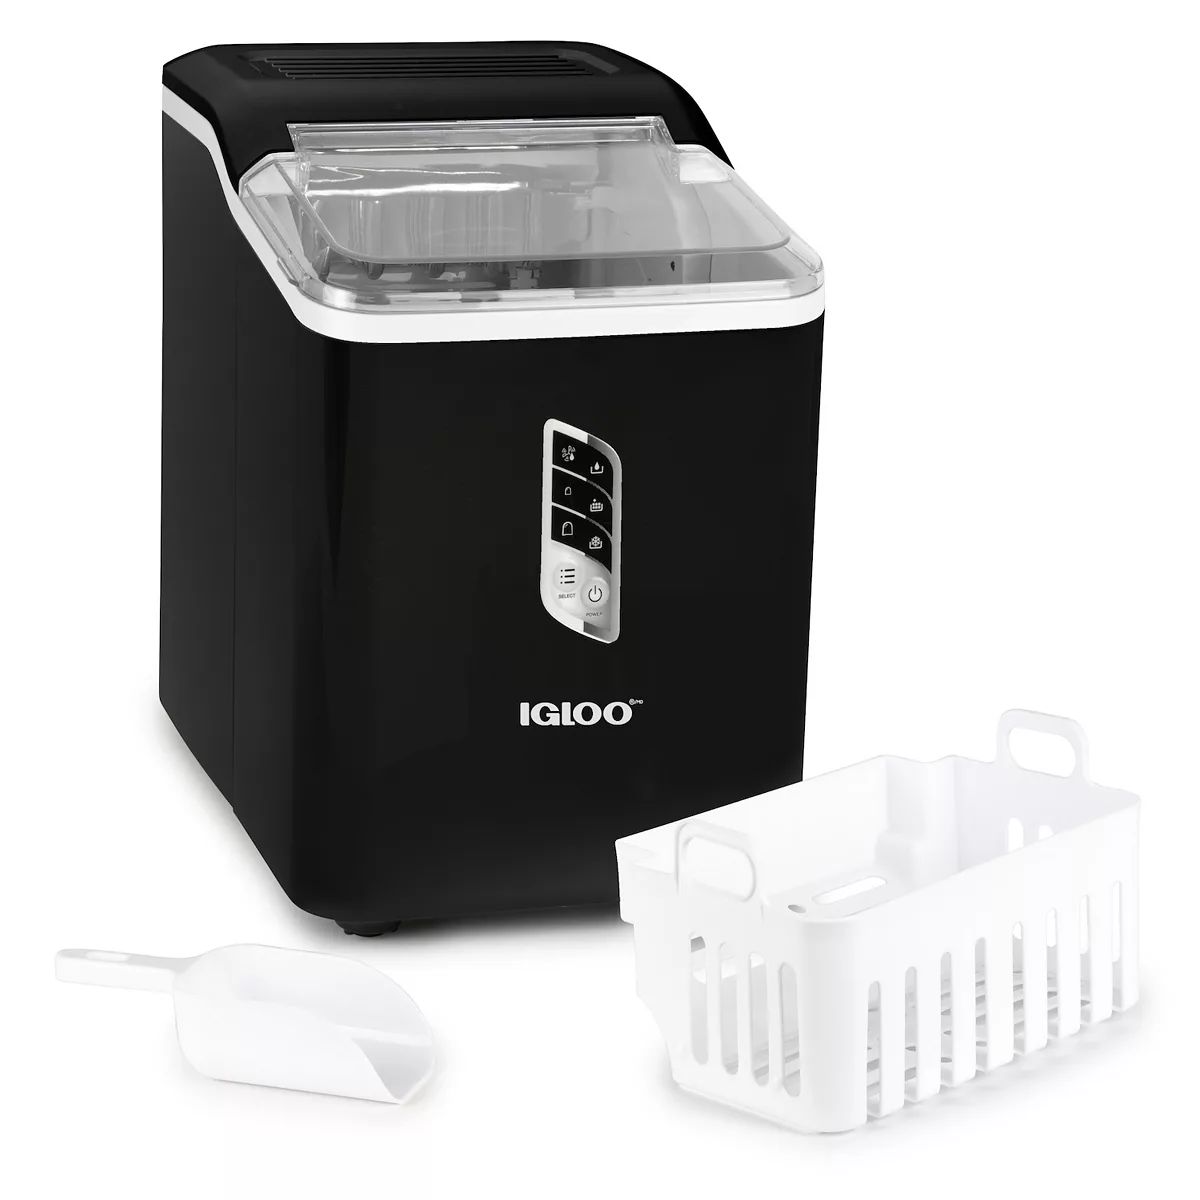 Igloo 26-Pound Automatic Self-Cleaning Ice Maker | Kohl's